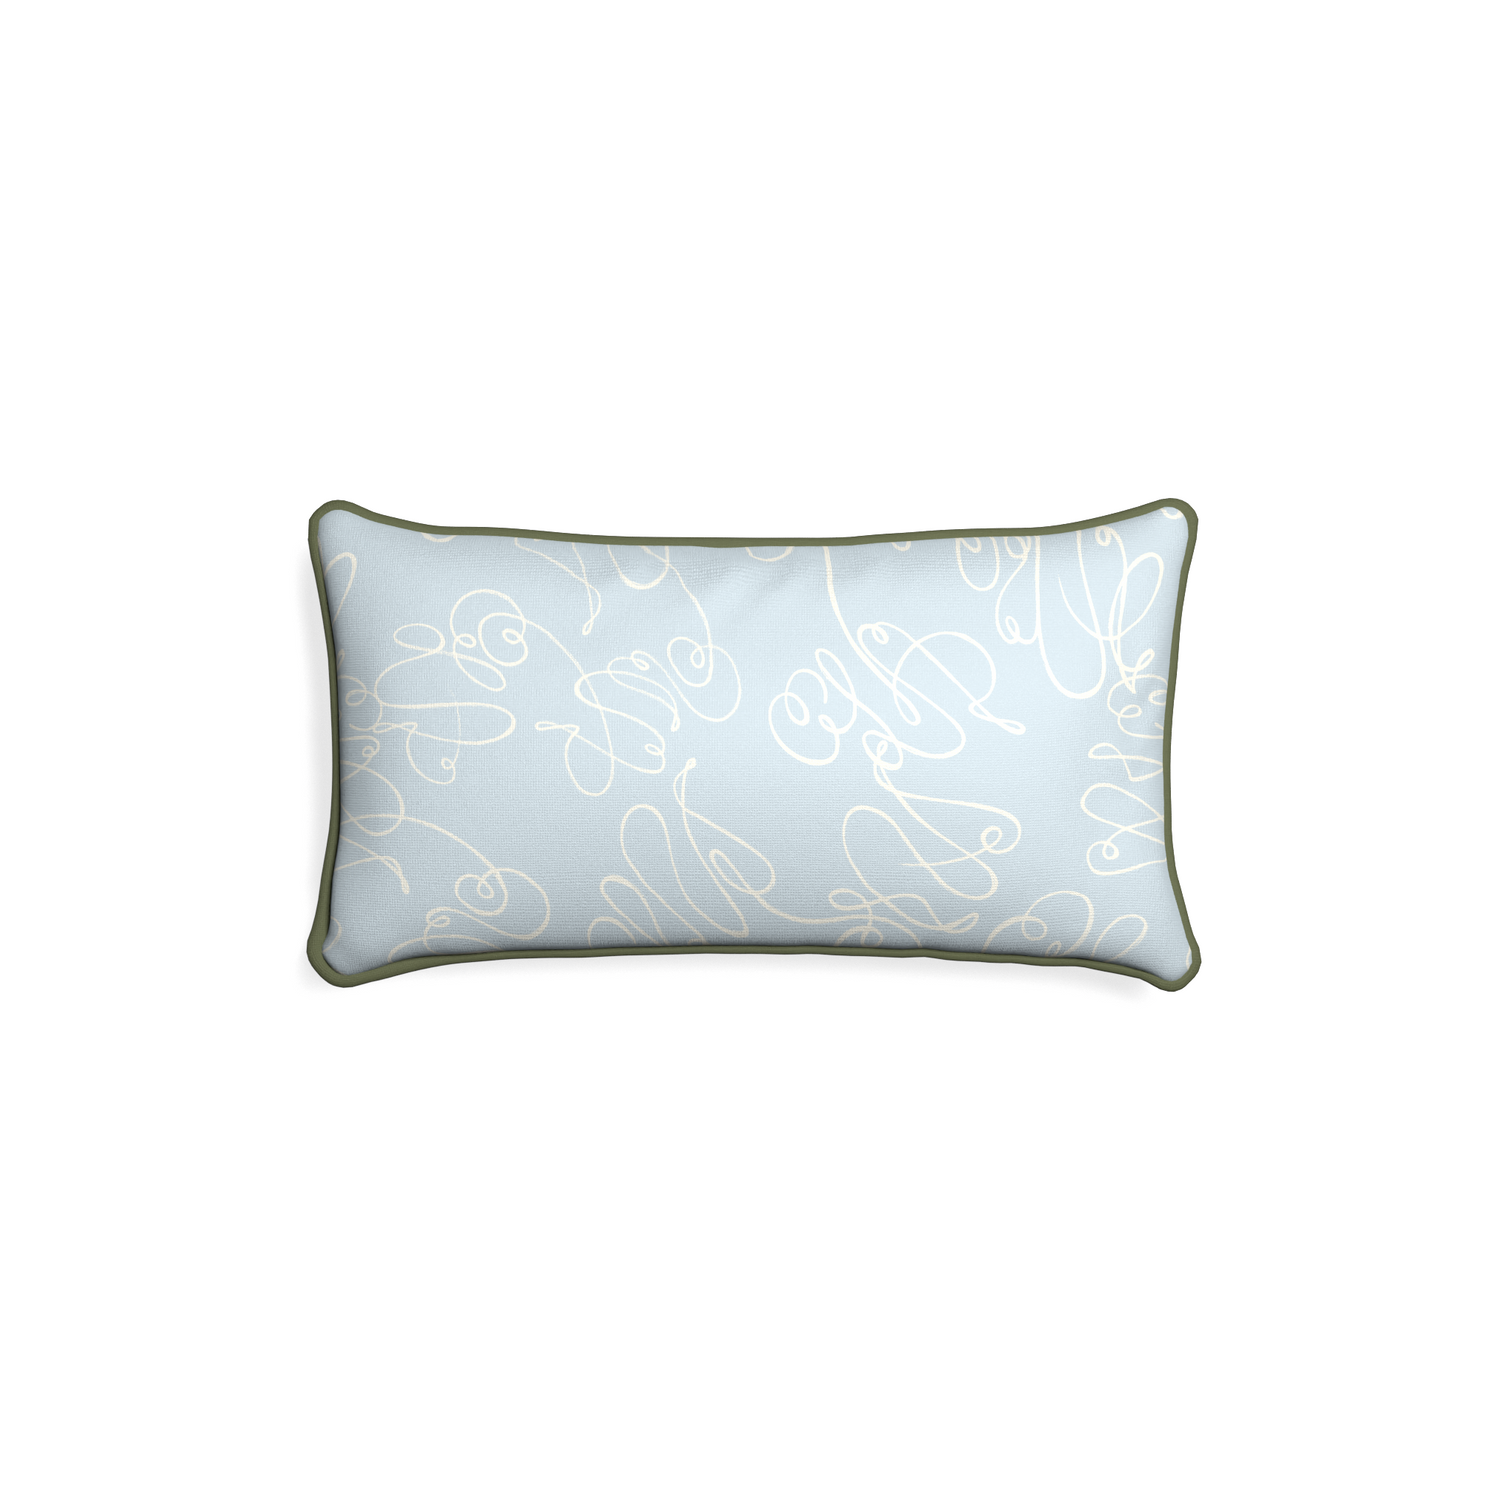 Petite-lumbar mirabella custom powder blue abstractpillow with f piping on white background